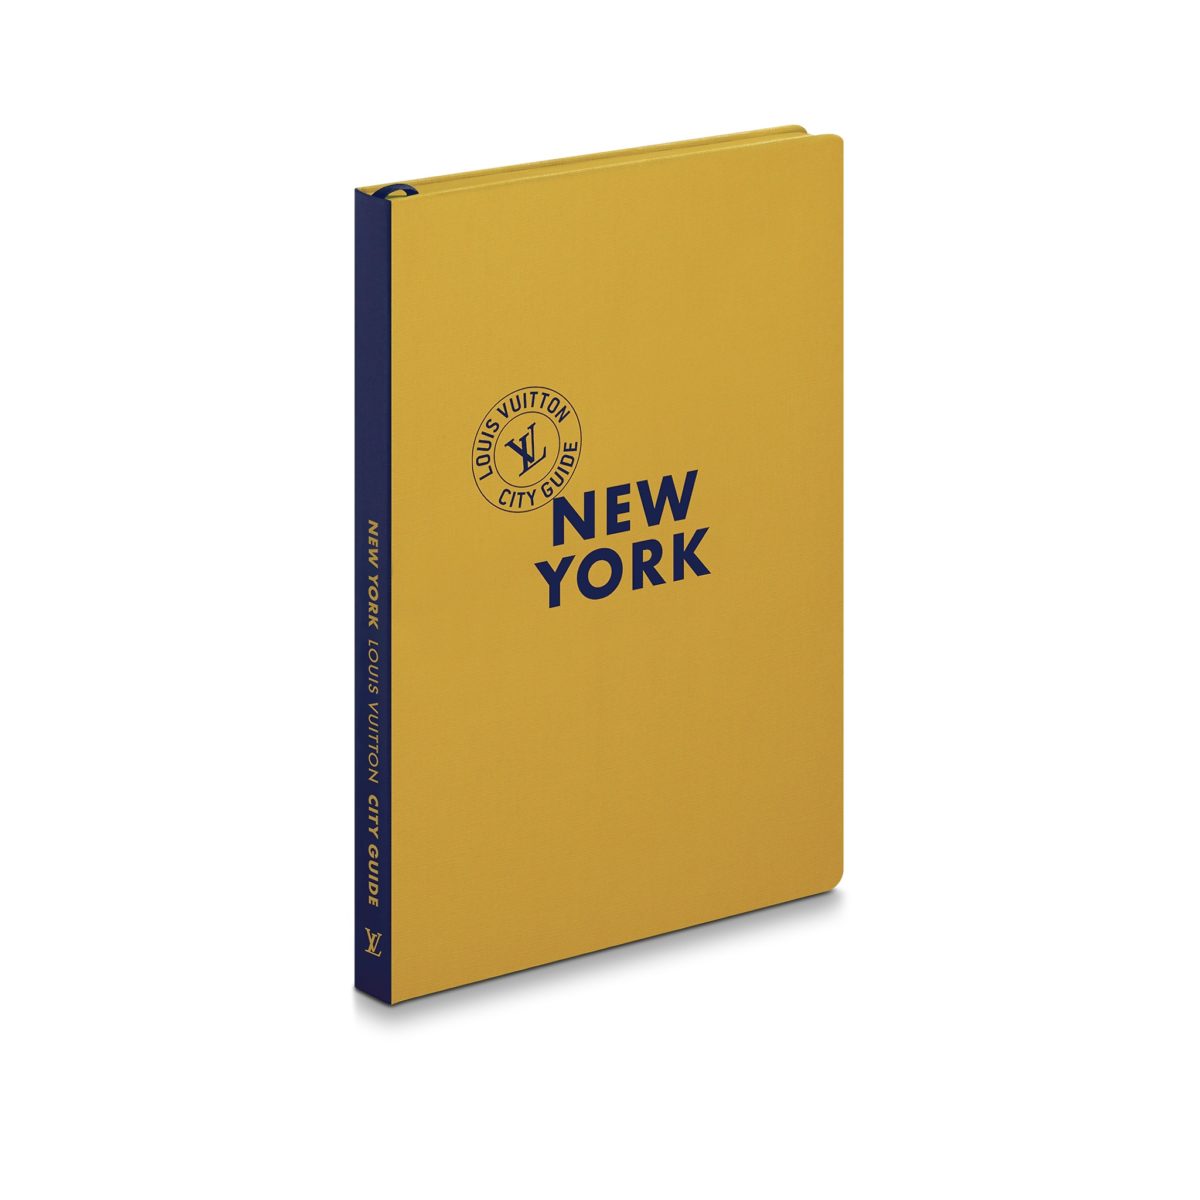 Louis Vuitton Dropped Their 2021 City Guide Books Just In Time For Your  Next Trip